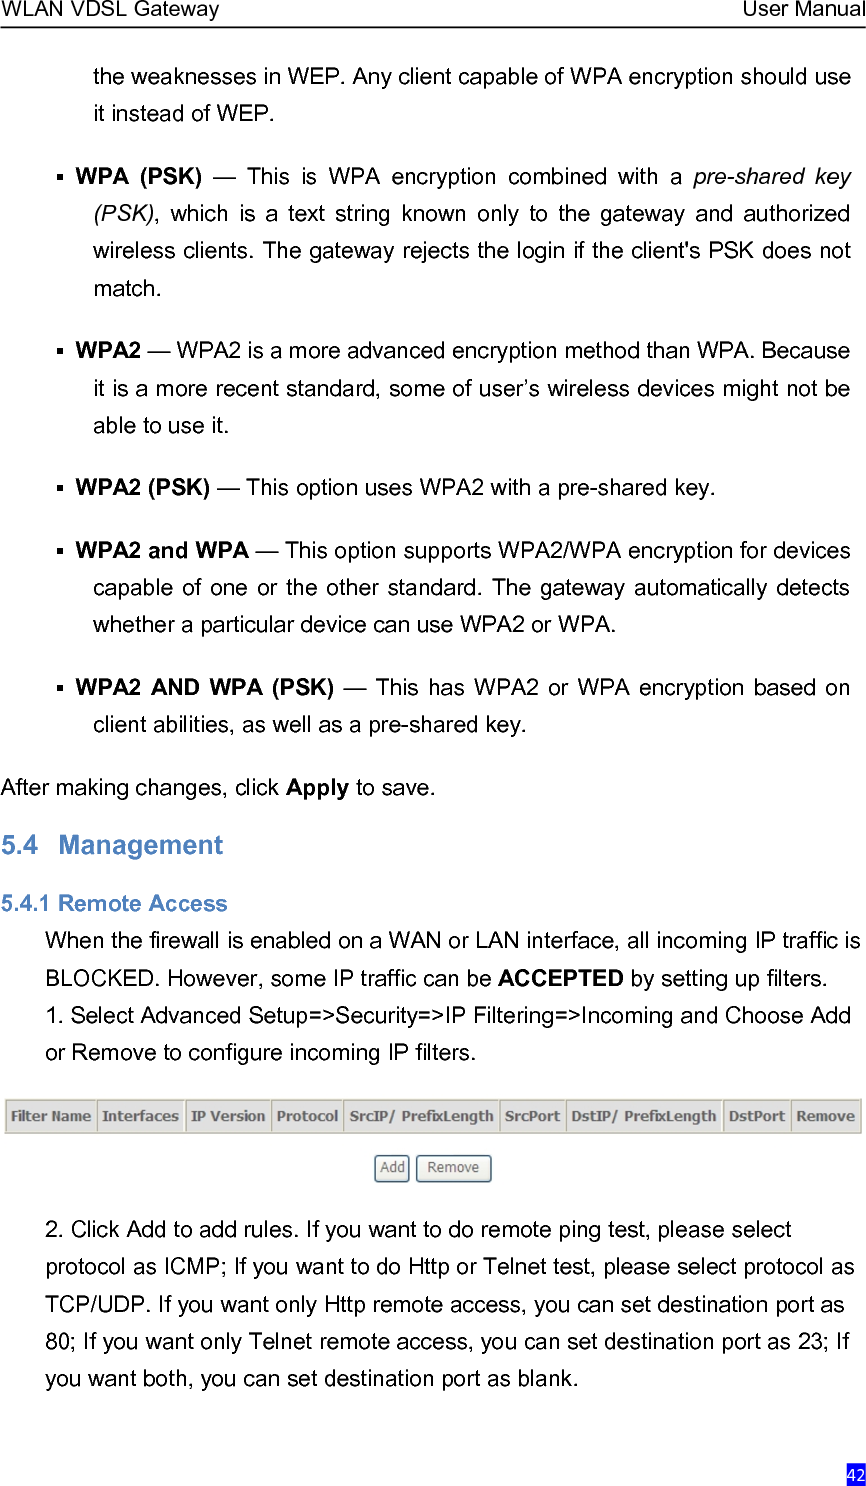 WLAN VDSL Gateway User Manual42the weaknesses in WEP. Any client capable of WPA encryption should useit instead of WEP.WPA (PSK) — This is WPA encryption combined with a pre-shared key(PSK), which is a text string known only to the gateway and authorizedwireless clients. The gateway rejects the login if the client&apos;s PSK does notmatch.WPA2 — WPA2 is a more advanced encryption method than WPA. Becauseit is a more recent standard, some of user’s wireless devices might not beable to use it.WPA2 (PSK) — This option uses WPA2 with a pre-shared key.WPA2 and WPA — This option supports WPA2/WPA encryption for devicescapable of one or the other standard. The gateway automatically detectswhether a particular device can use WPA2 or WPA.WPA2 AND WPA (PSK) — This has WPA2 or WPA encryption based onclient abilities, as well as a pre-shared key.After making changes, click Apply to save.5.4 Management5.4.1 Remote AccessWhen the firewall is enabled on a WAN or LAN interface, all incoming IP traffic isBLOCKED. However, some IP traffic can be ACCEPTED by setting up filters.1. Select Advanced Setup=&gt;Security=&gt;IP Filtering=&gt;Incoming and Choose Addor Remove to configure incoming IP filters.2. Click Add to add rules. If you want to do remote ping test, please selectprotocol as ICMP; If you want to do Http or Telnet test, please select protocol asTCP/UDP. If you want only Http remote access, you can set destination port as80; If you want only Telnet remote access, you can set destination port as 23; Ifyou want both, you can set destination port as blank.